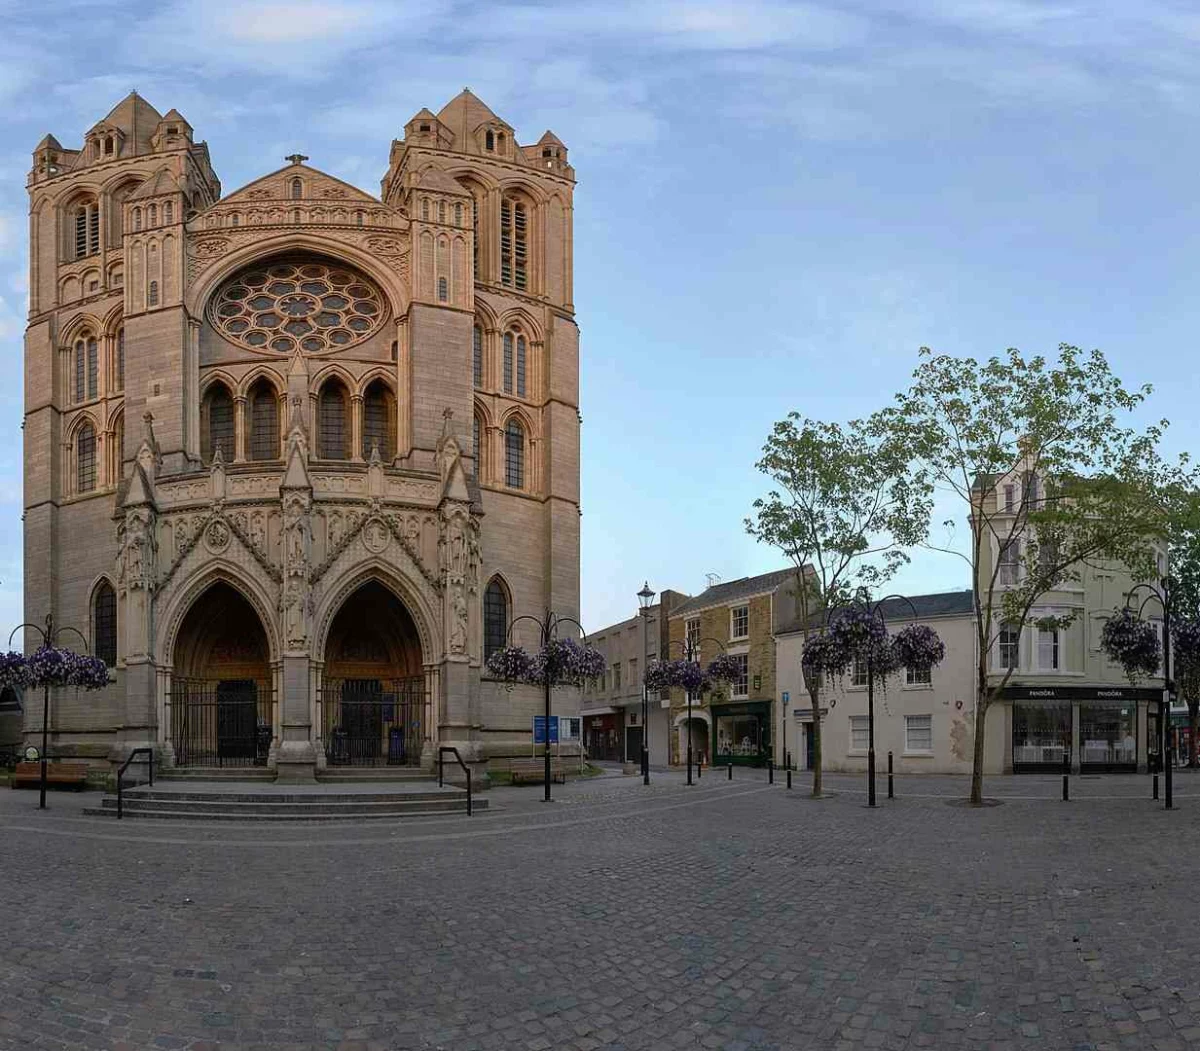 1233px-Truro_High_Cross_5_6_6a_and_Cathedral_west_facade